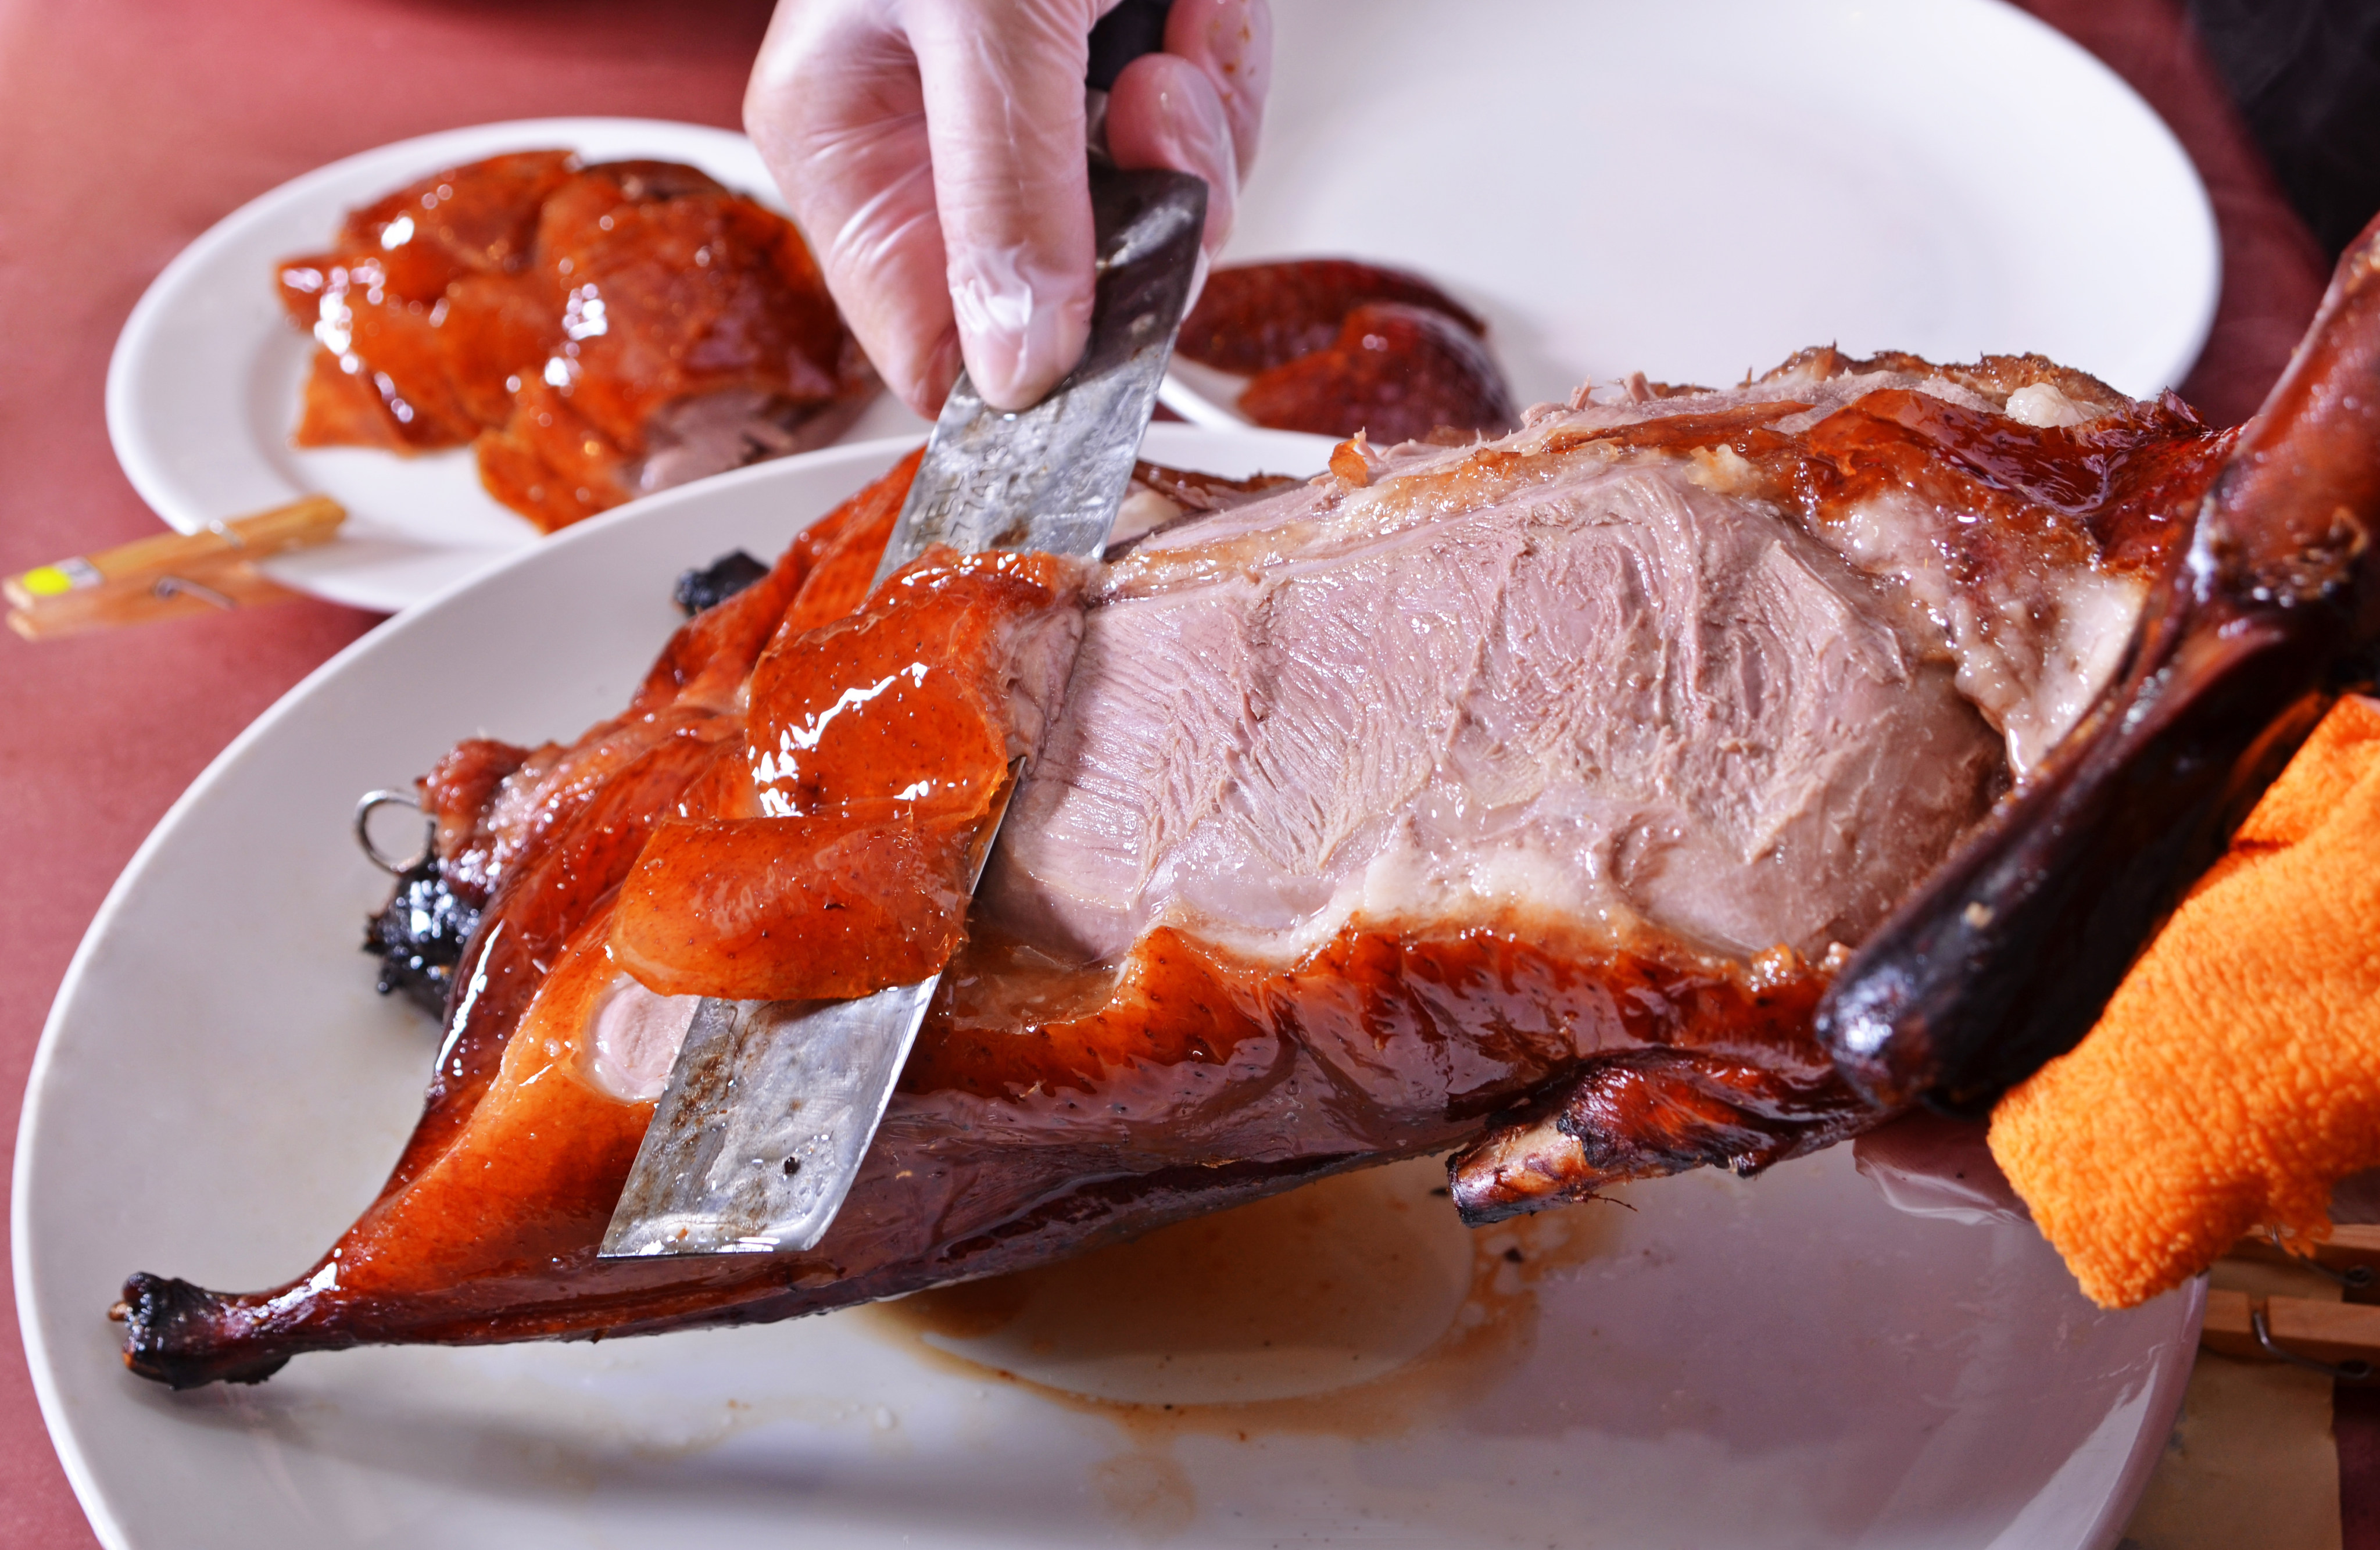 Peking roast duck, a popular Chinese dish, can be purchased online in ready-to-consume packs. Photo: Shutterstock Images